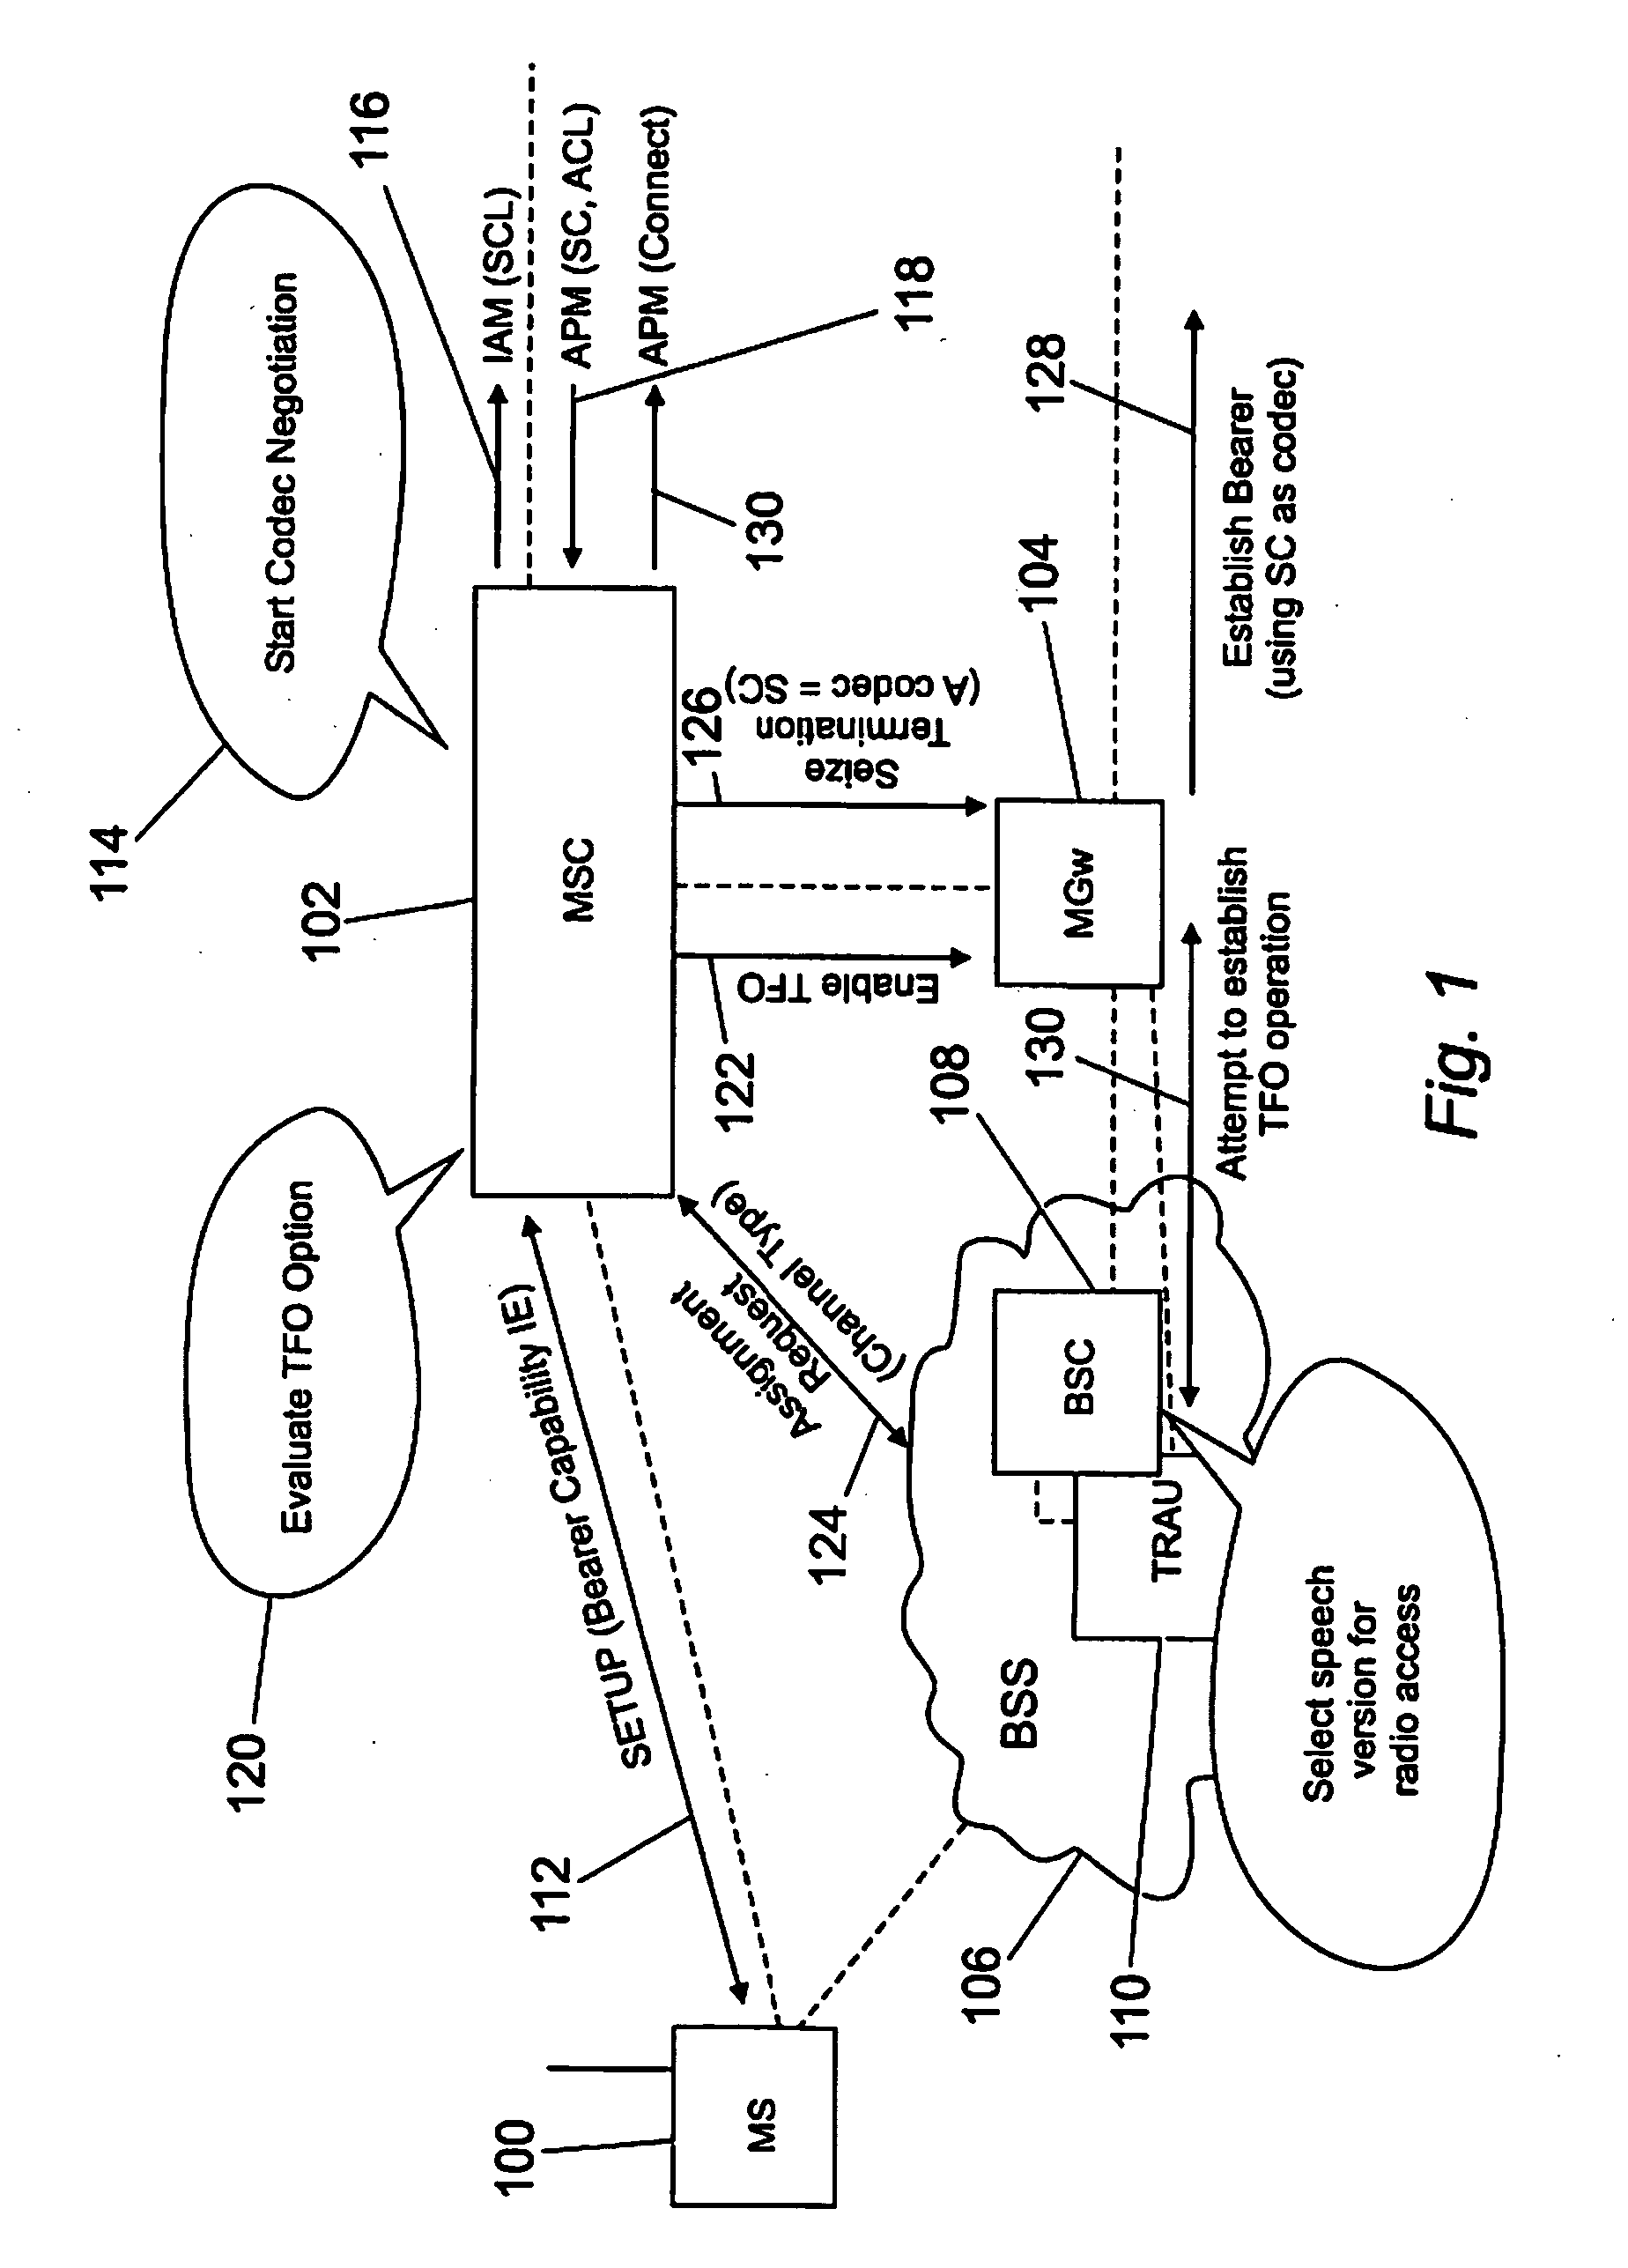 Method for codec negotiation and selection